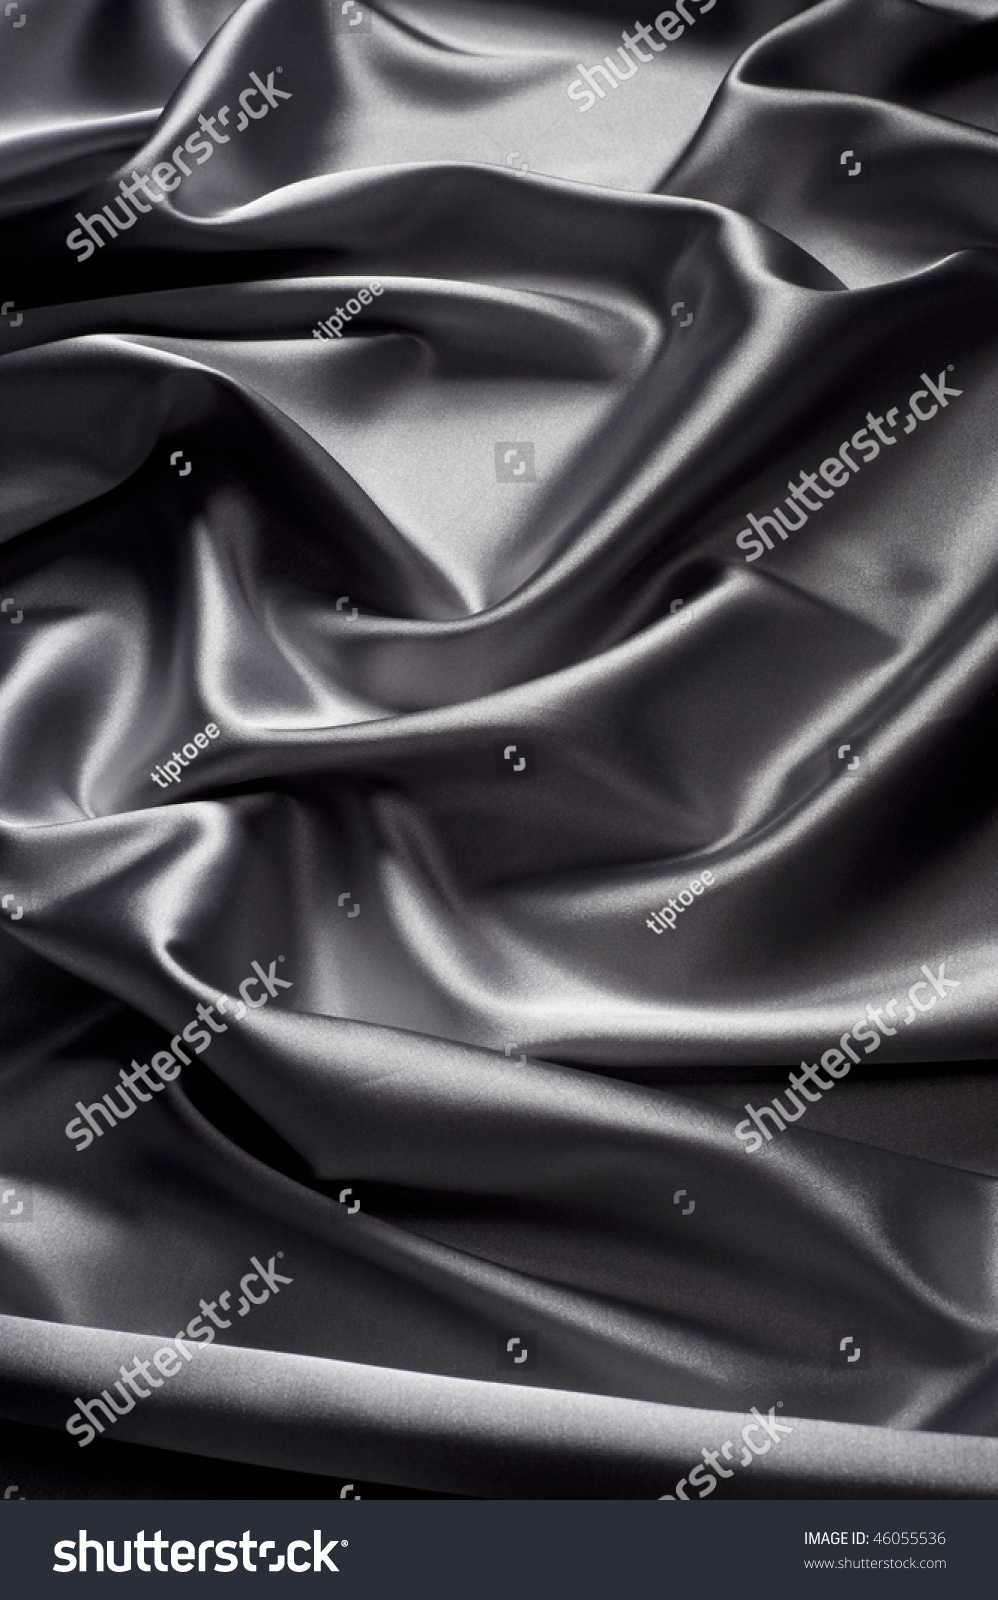 Textile Silver Satin Background Draped In Waves Stock Photo 46055536 ...